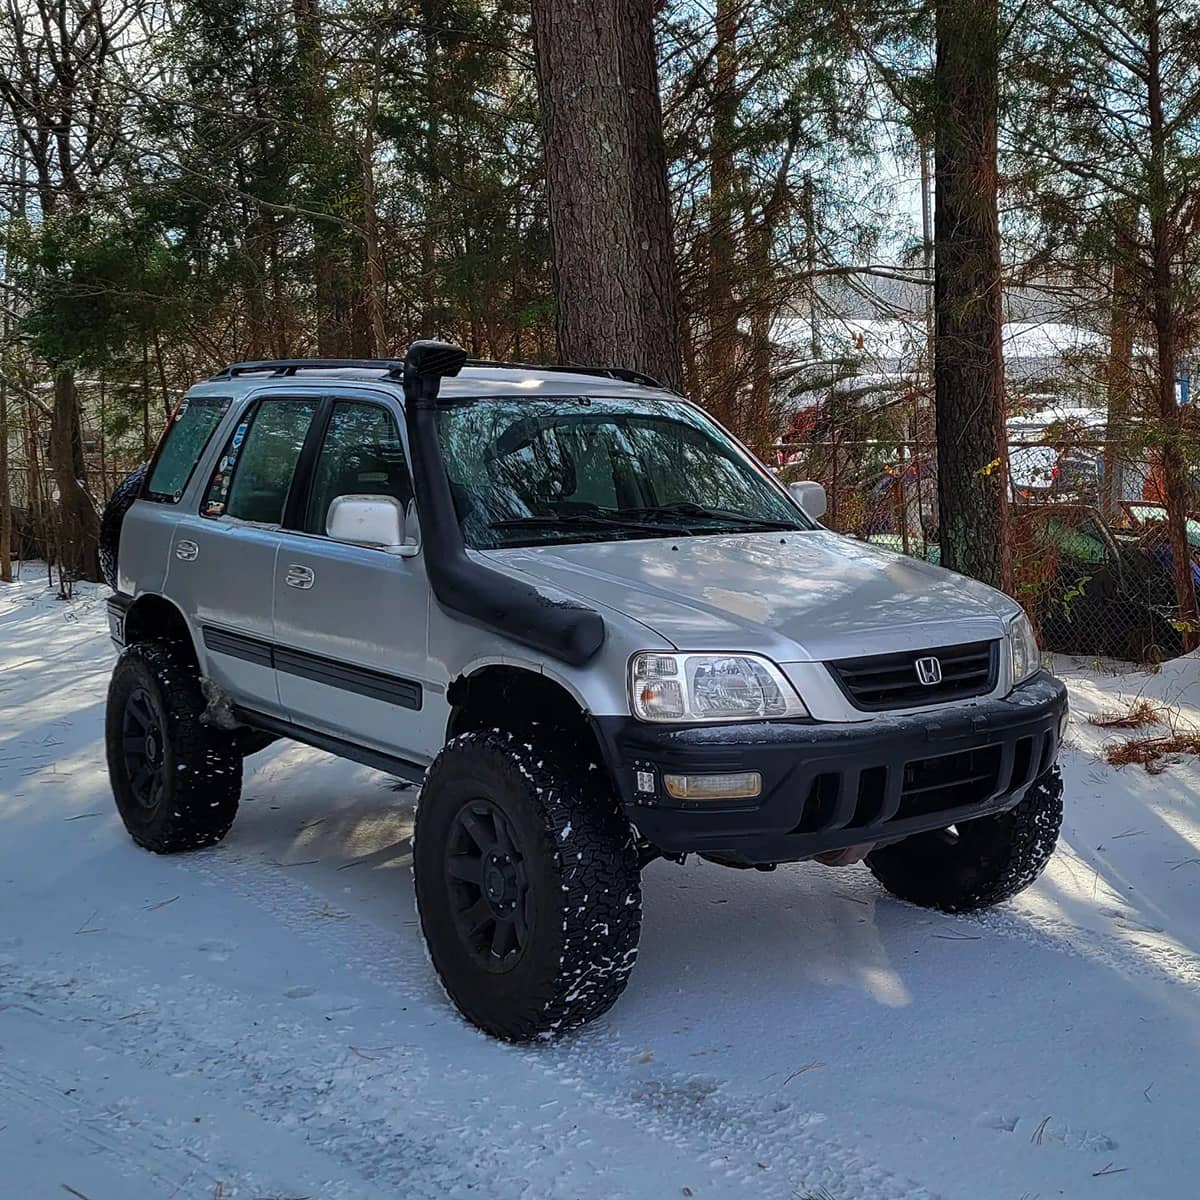 Lifted Honda CR-V with off-road wheels and a snorkel